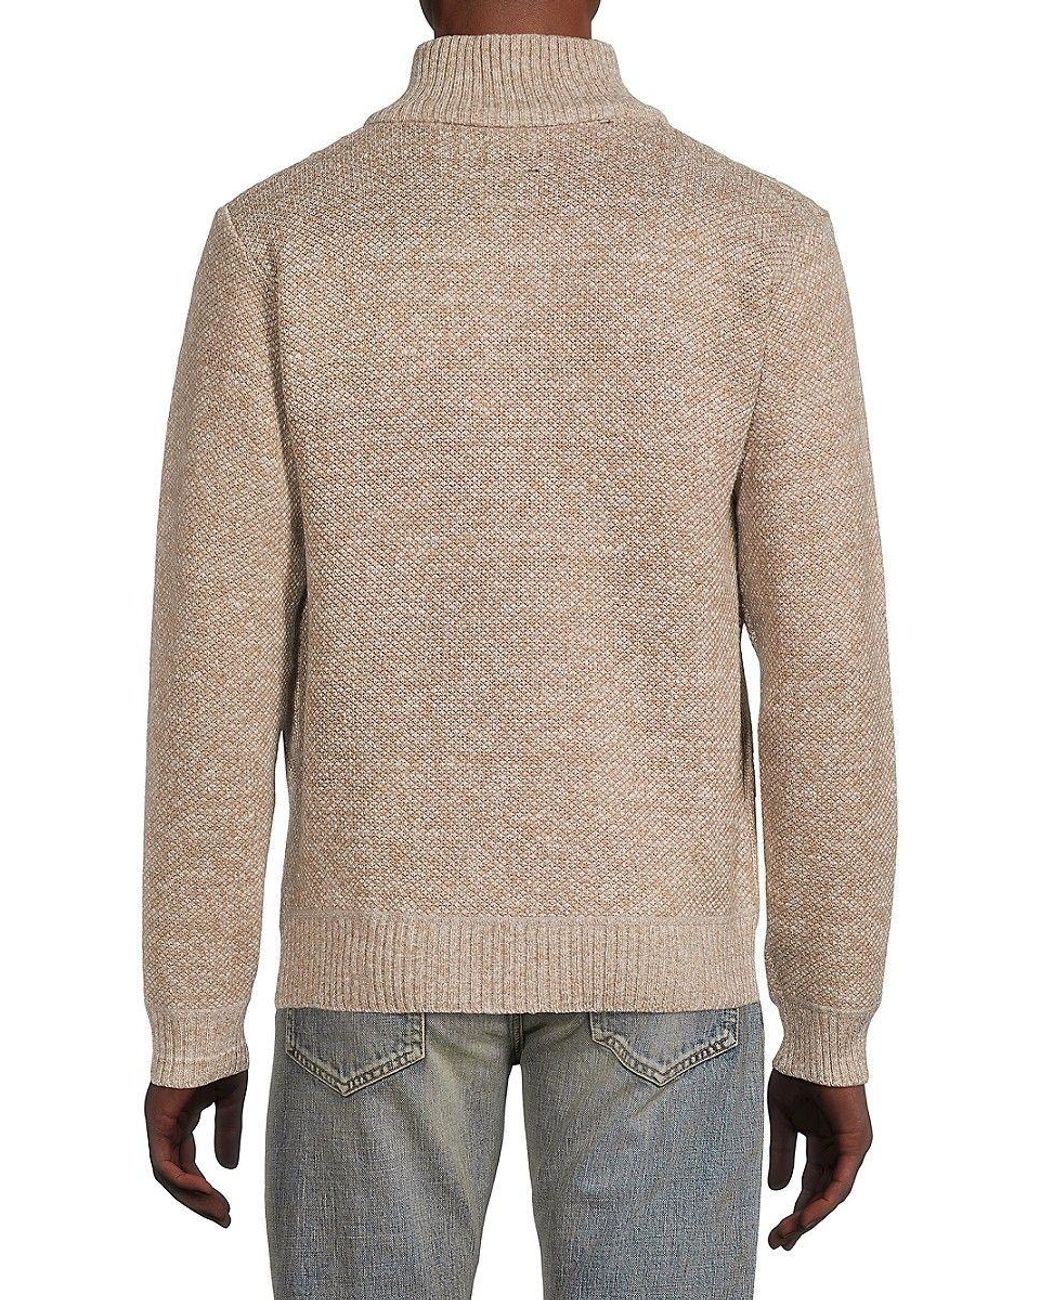 Buffalo David Bitton Walkley Faux Fur Lined Cable Knit Sweater in